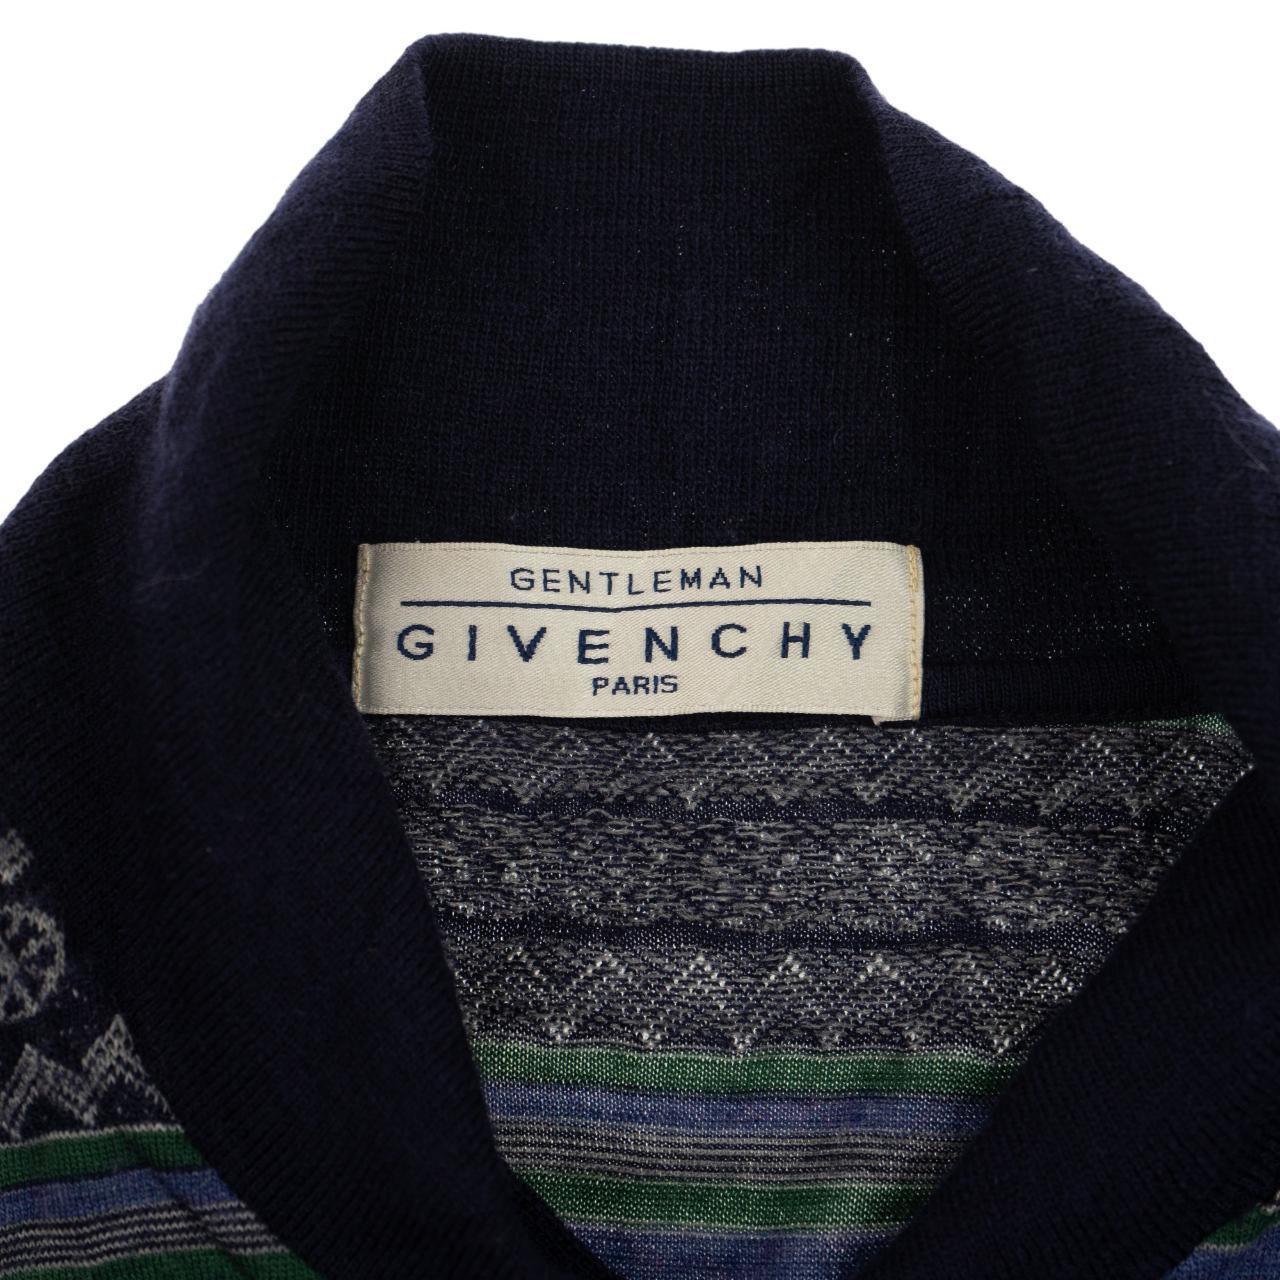 Vintage Givenchy Pattern Long Sleeve Polo Shirt Size M - Known Source